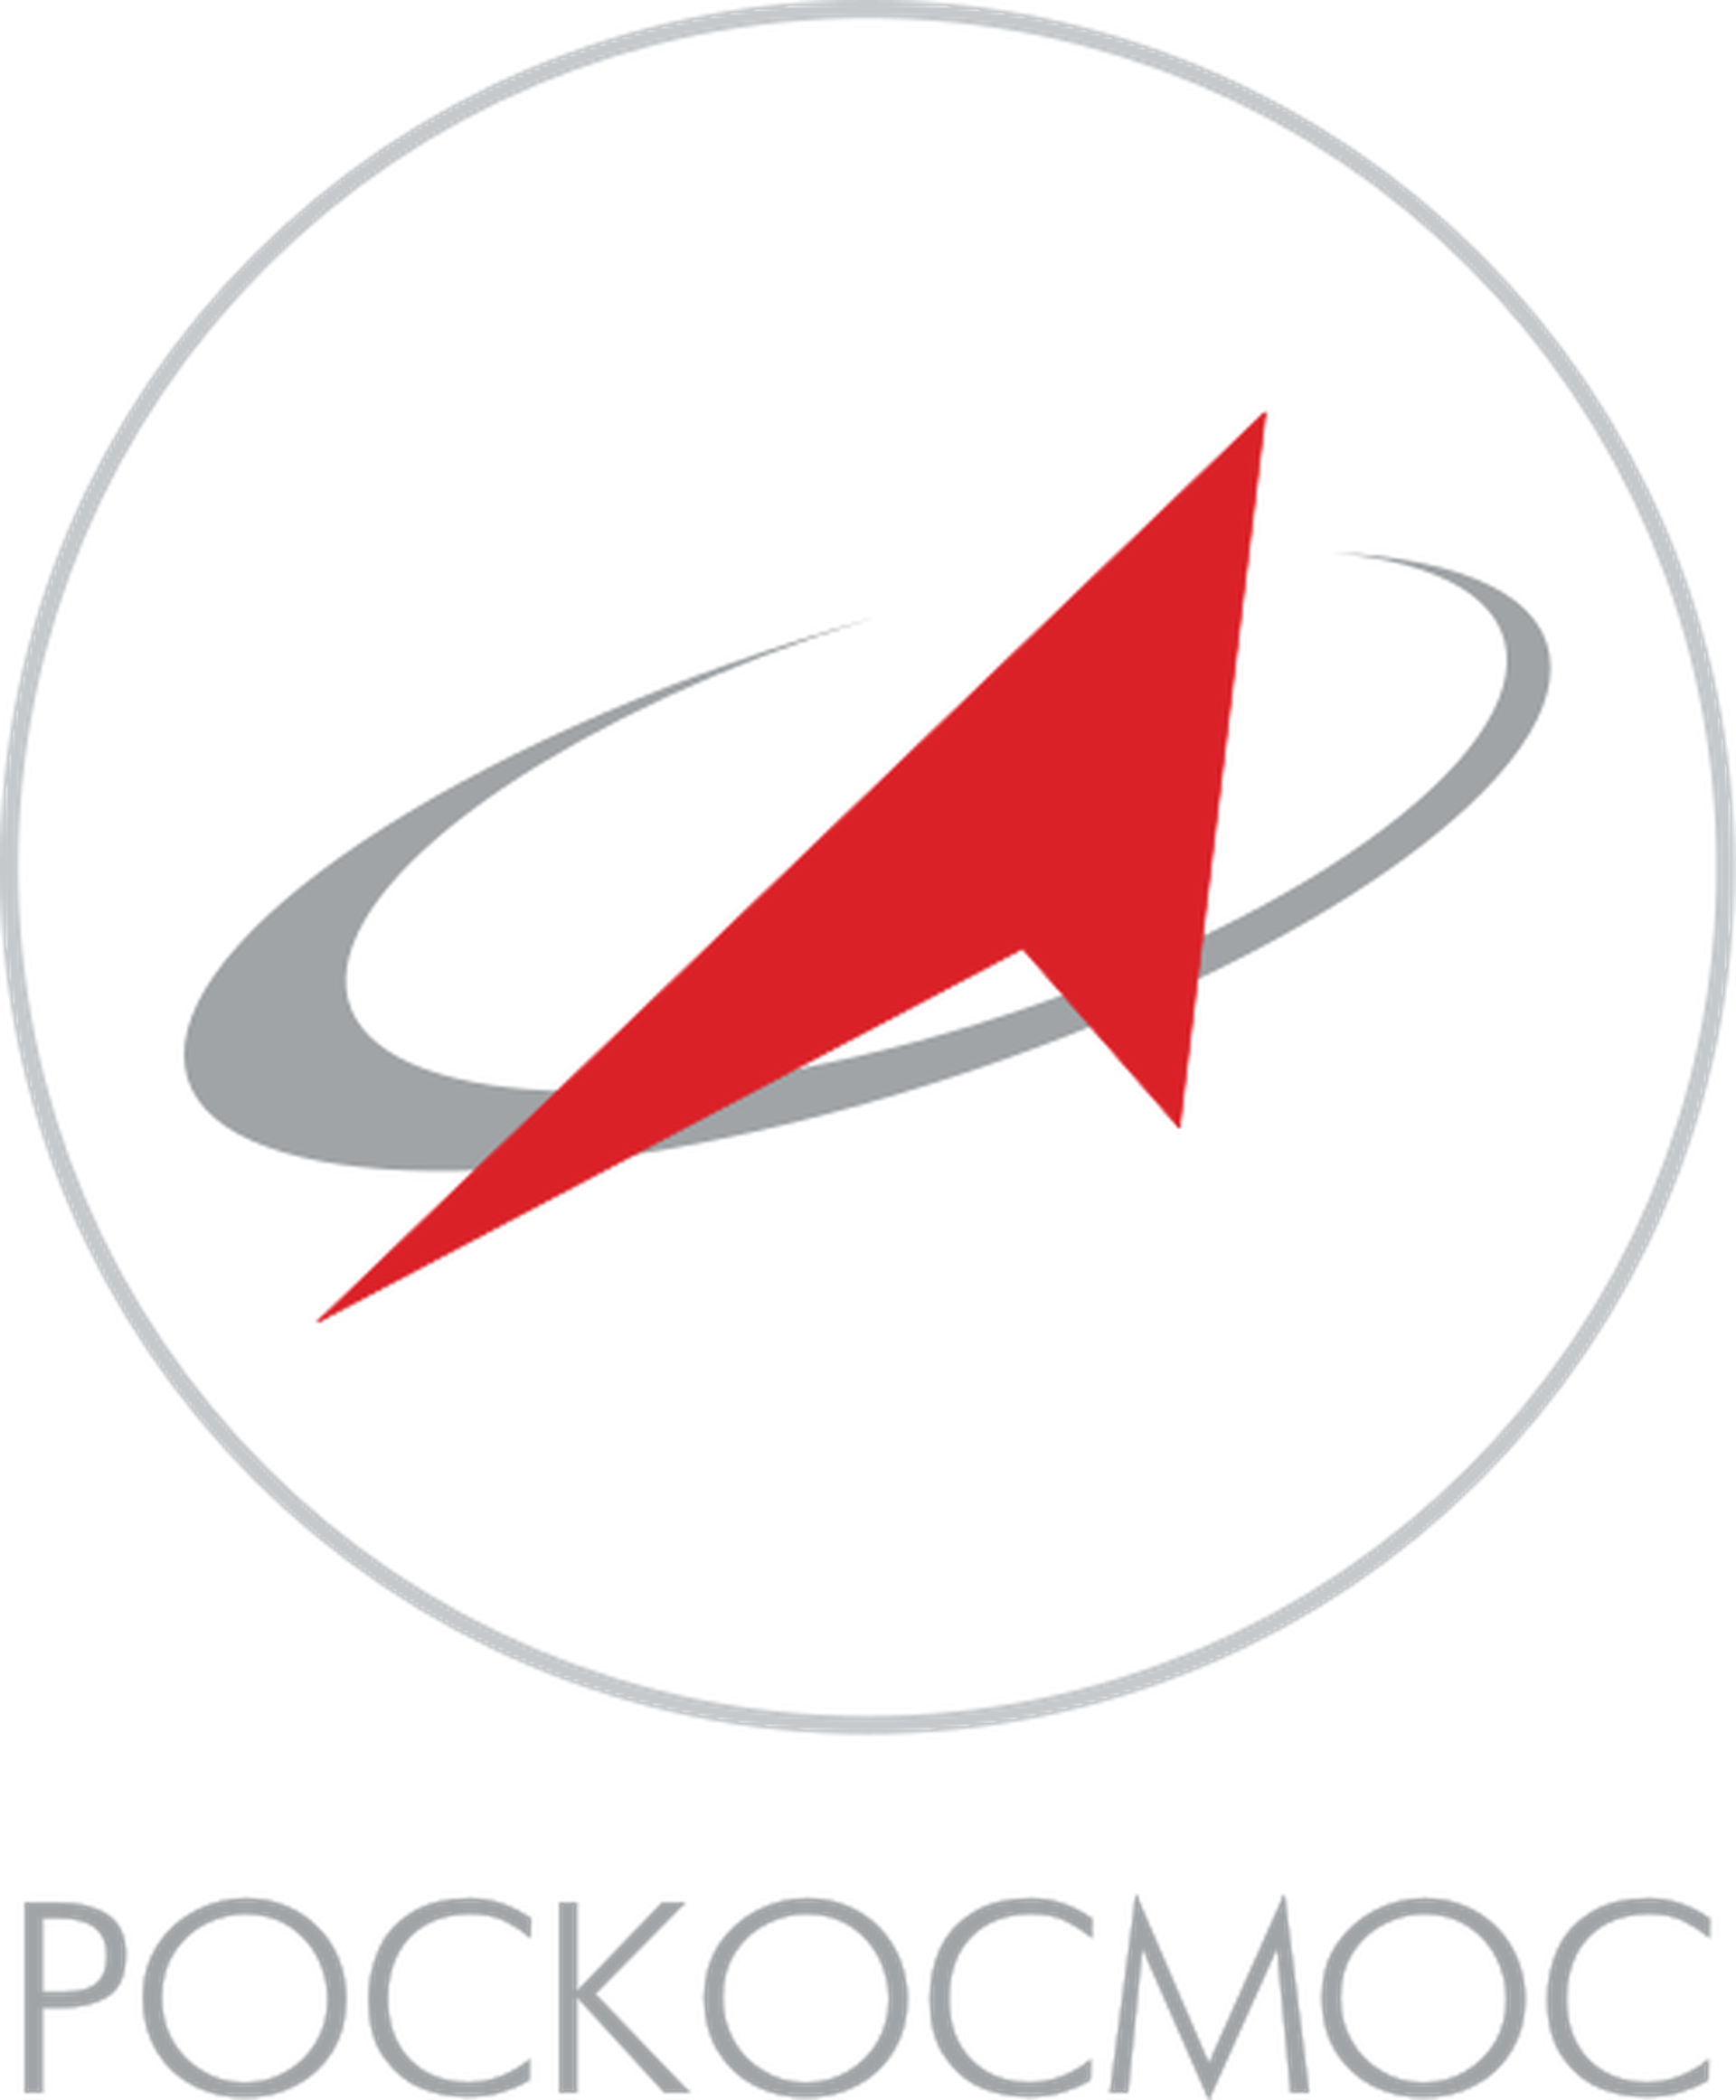 Russian Federal Space Agency (ROSCOSMOS)